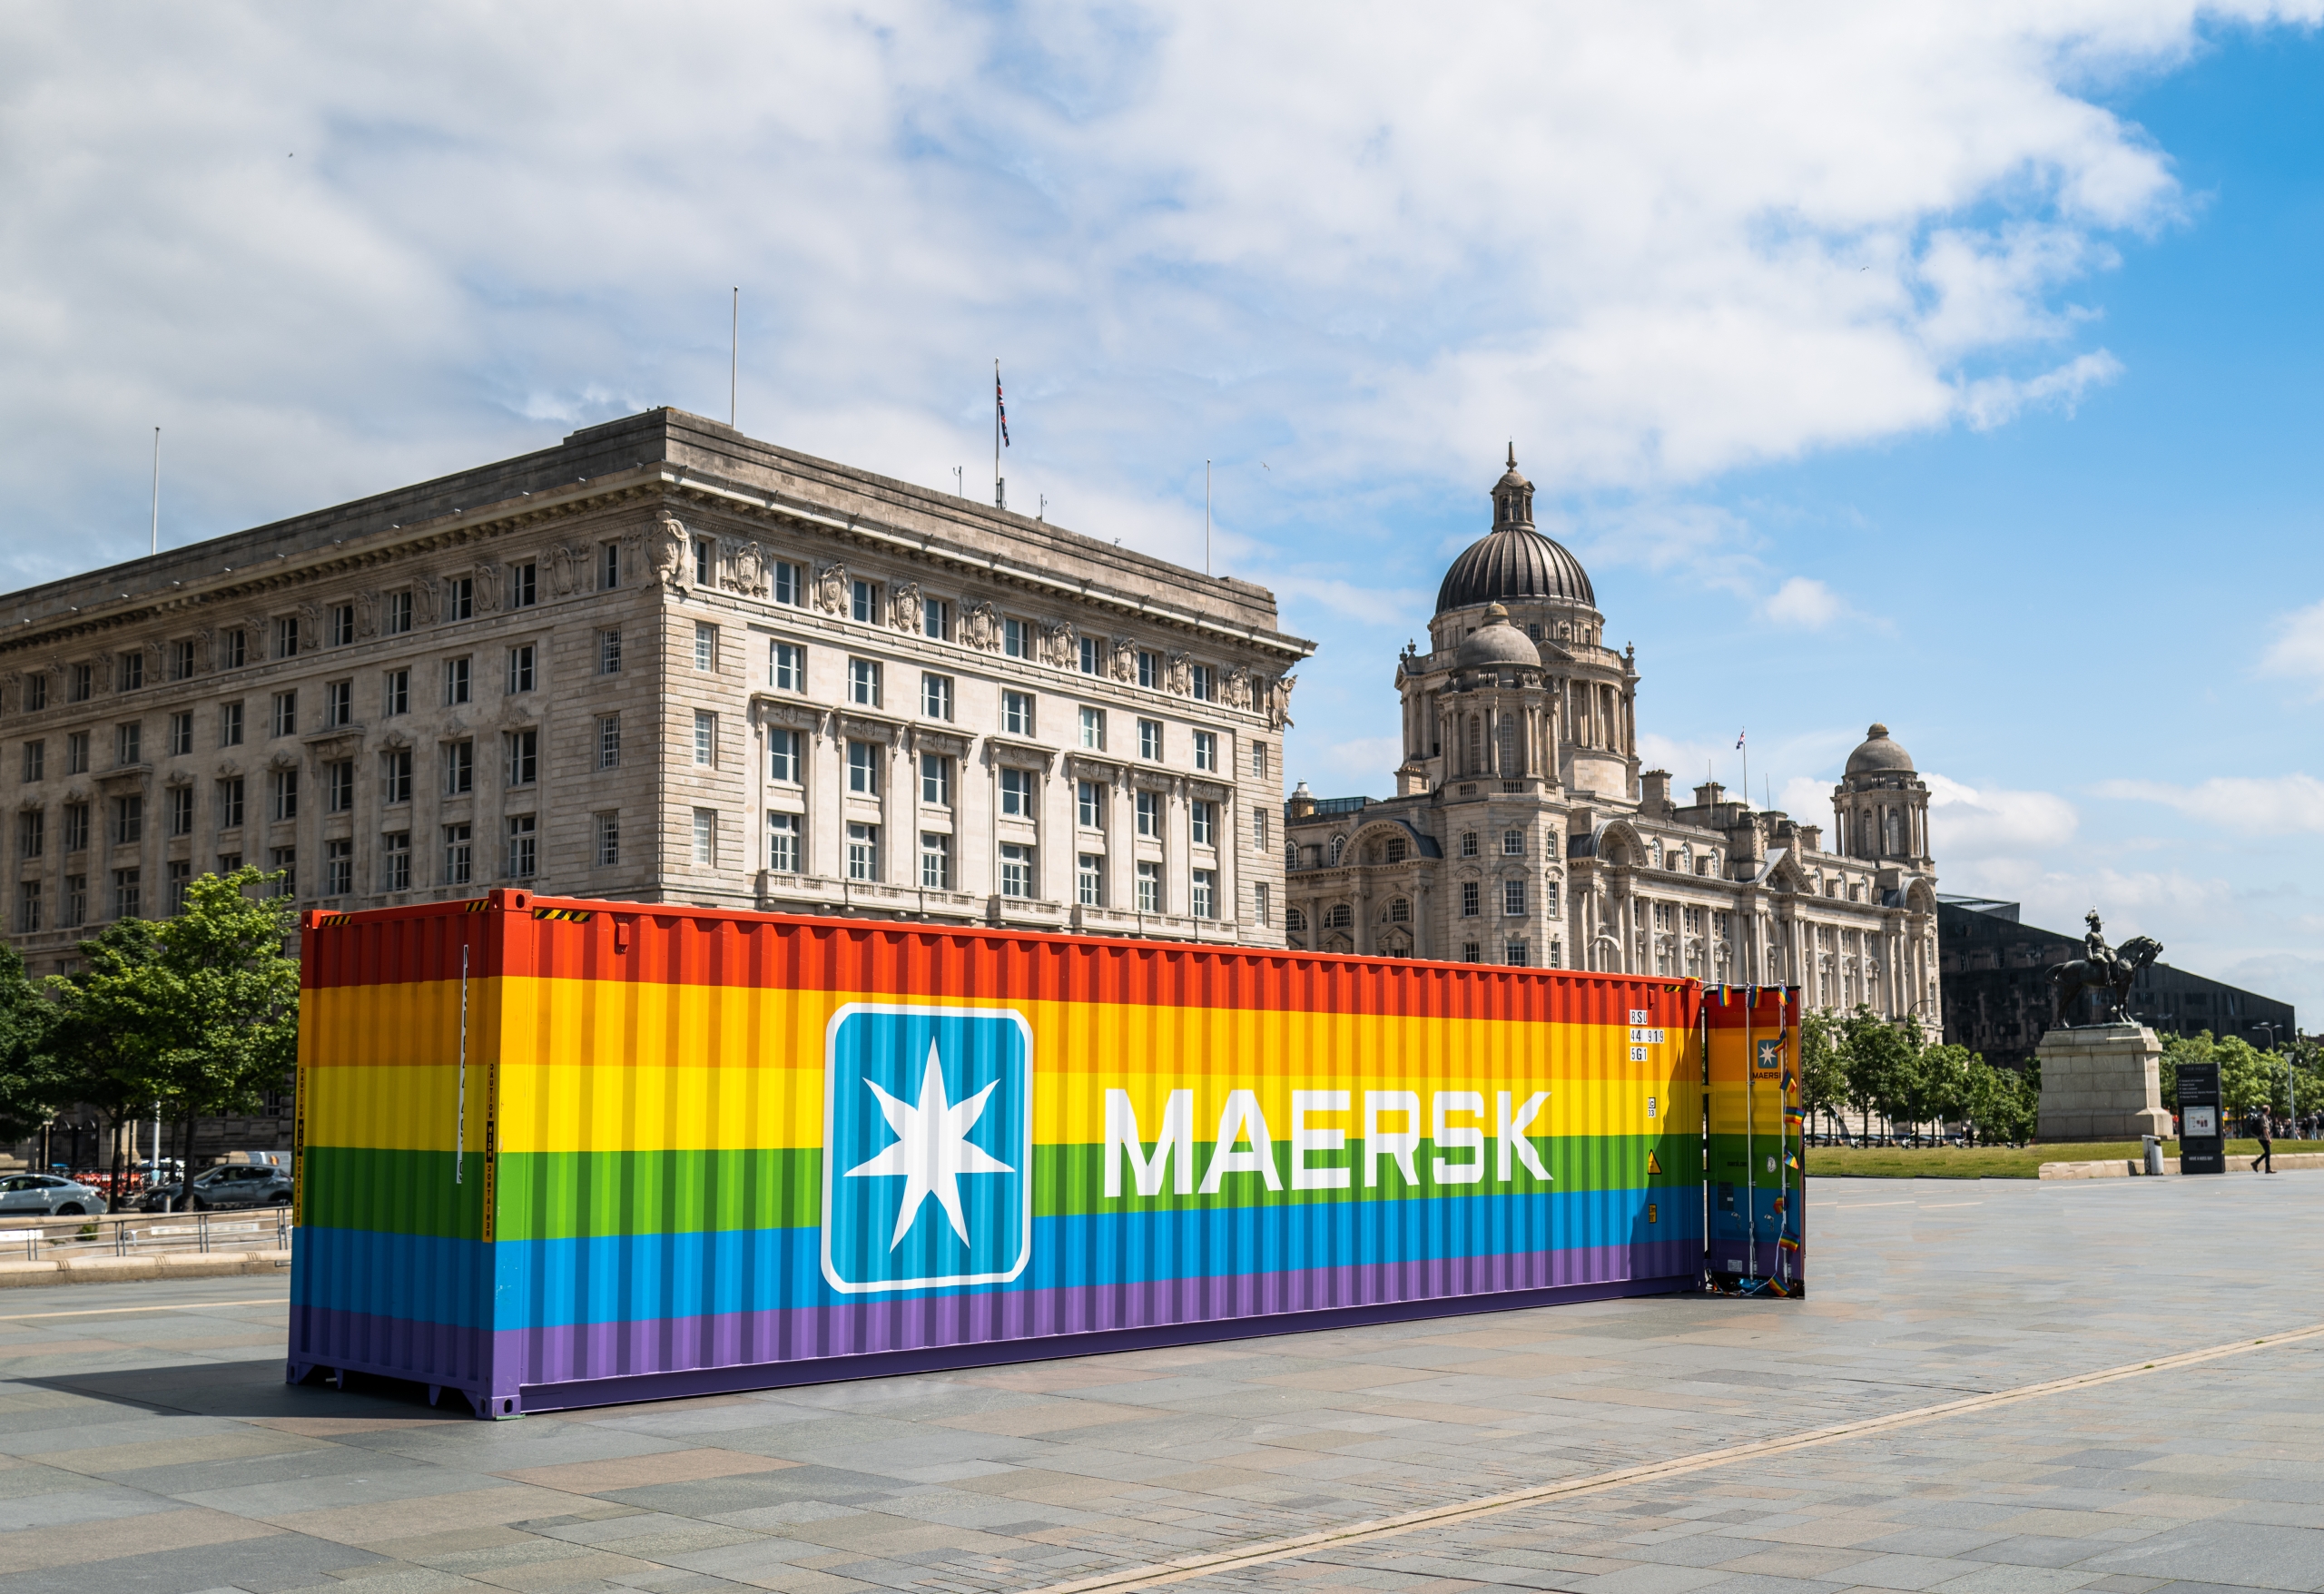 Large storage container painted in rainbow colours with maersk logo on side in front of cunard and port of liverpool buildings